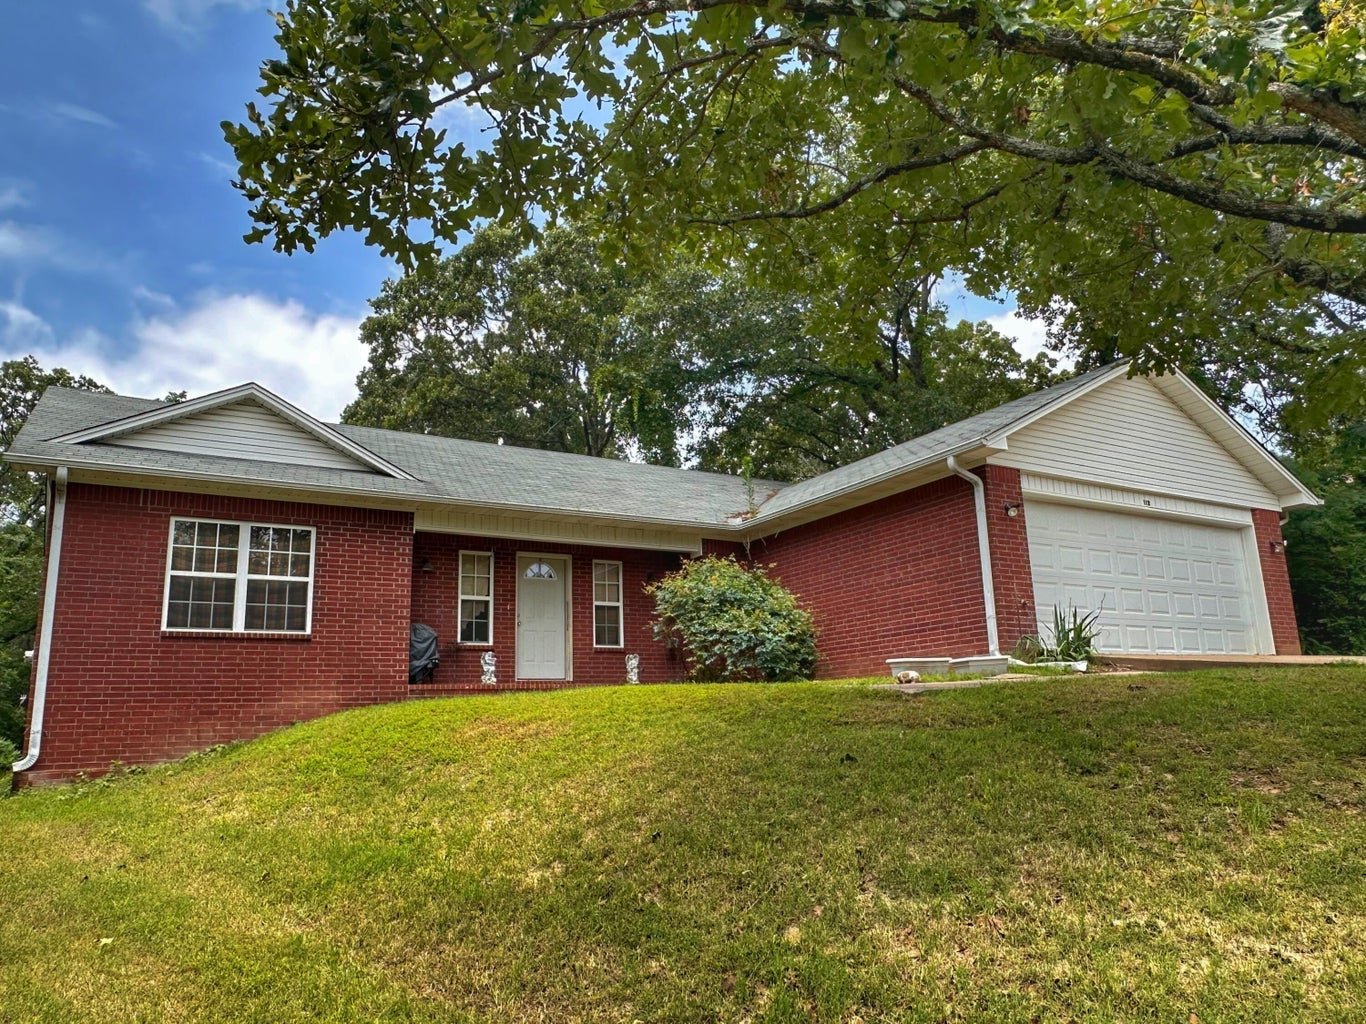 Take a closer look at 112 Mooncrest Way and imagine how you could transform it! 🏡 🤔

This West Russellville home is perfect for those looking to invest in a property with great bones and the potential to create a wonderful home. With its desirable 